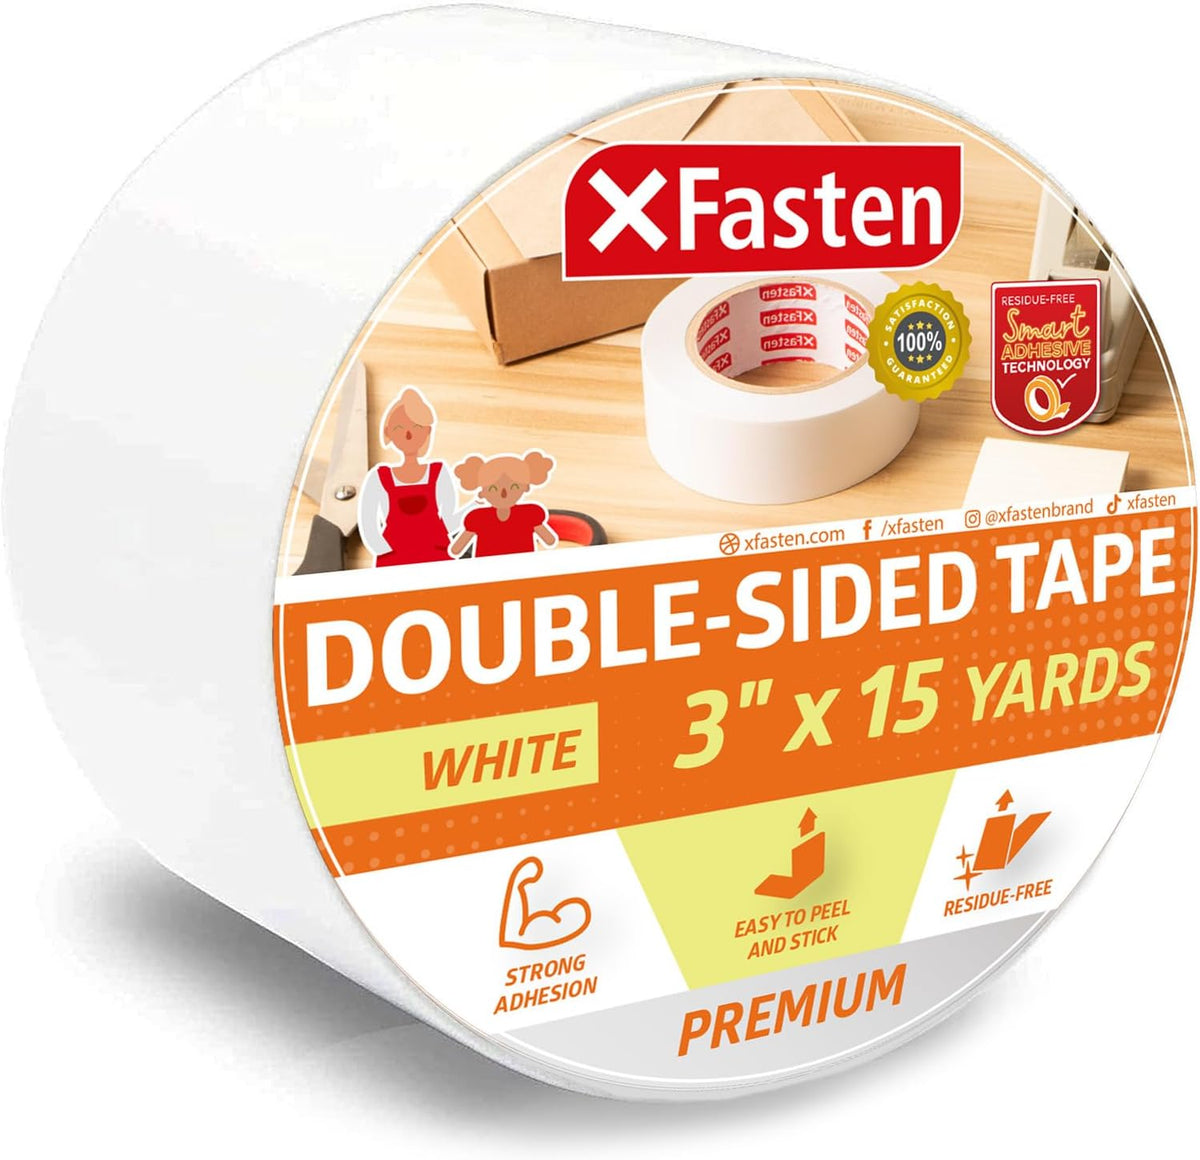 XFasten Double Sided Woodworking Tape 2.5 Inches x 30 Yards Bundle with  Woodworking Tape 1 Inch by 36 Yards (3-Pack) - Double Face Woodworker  Turner's